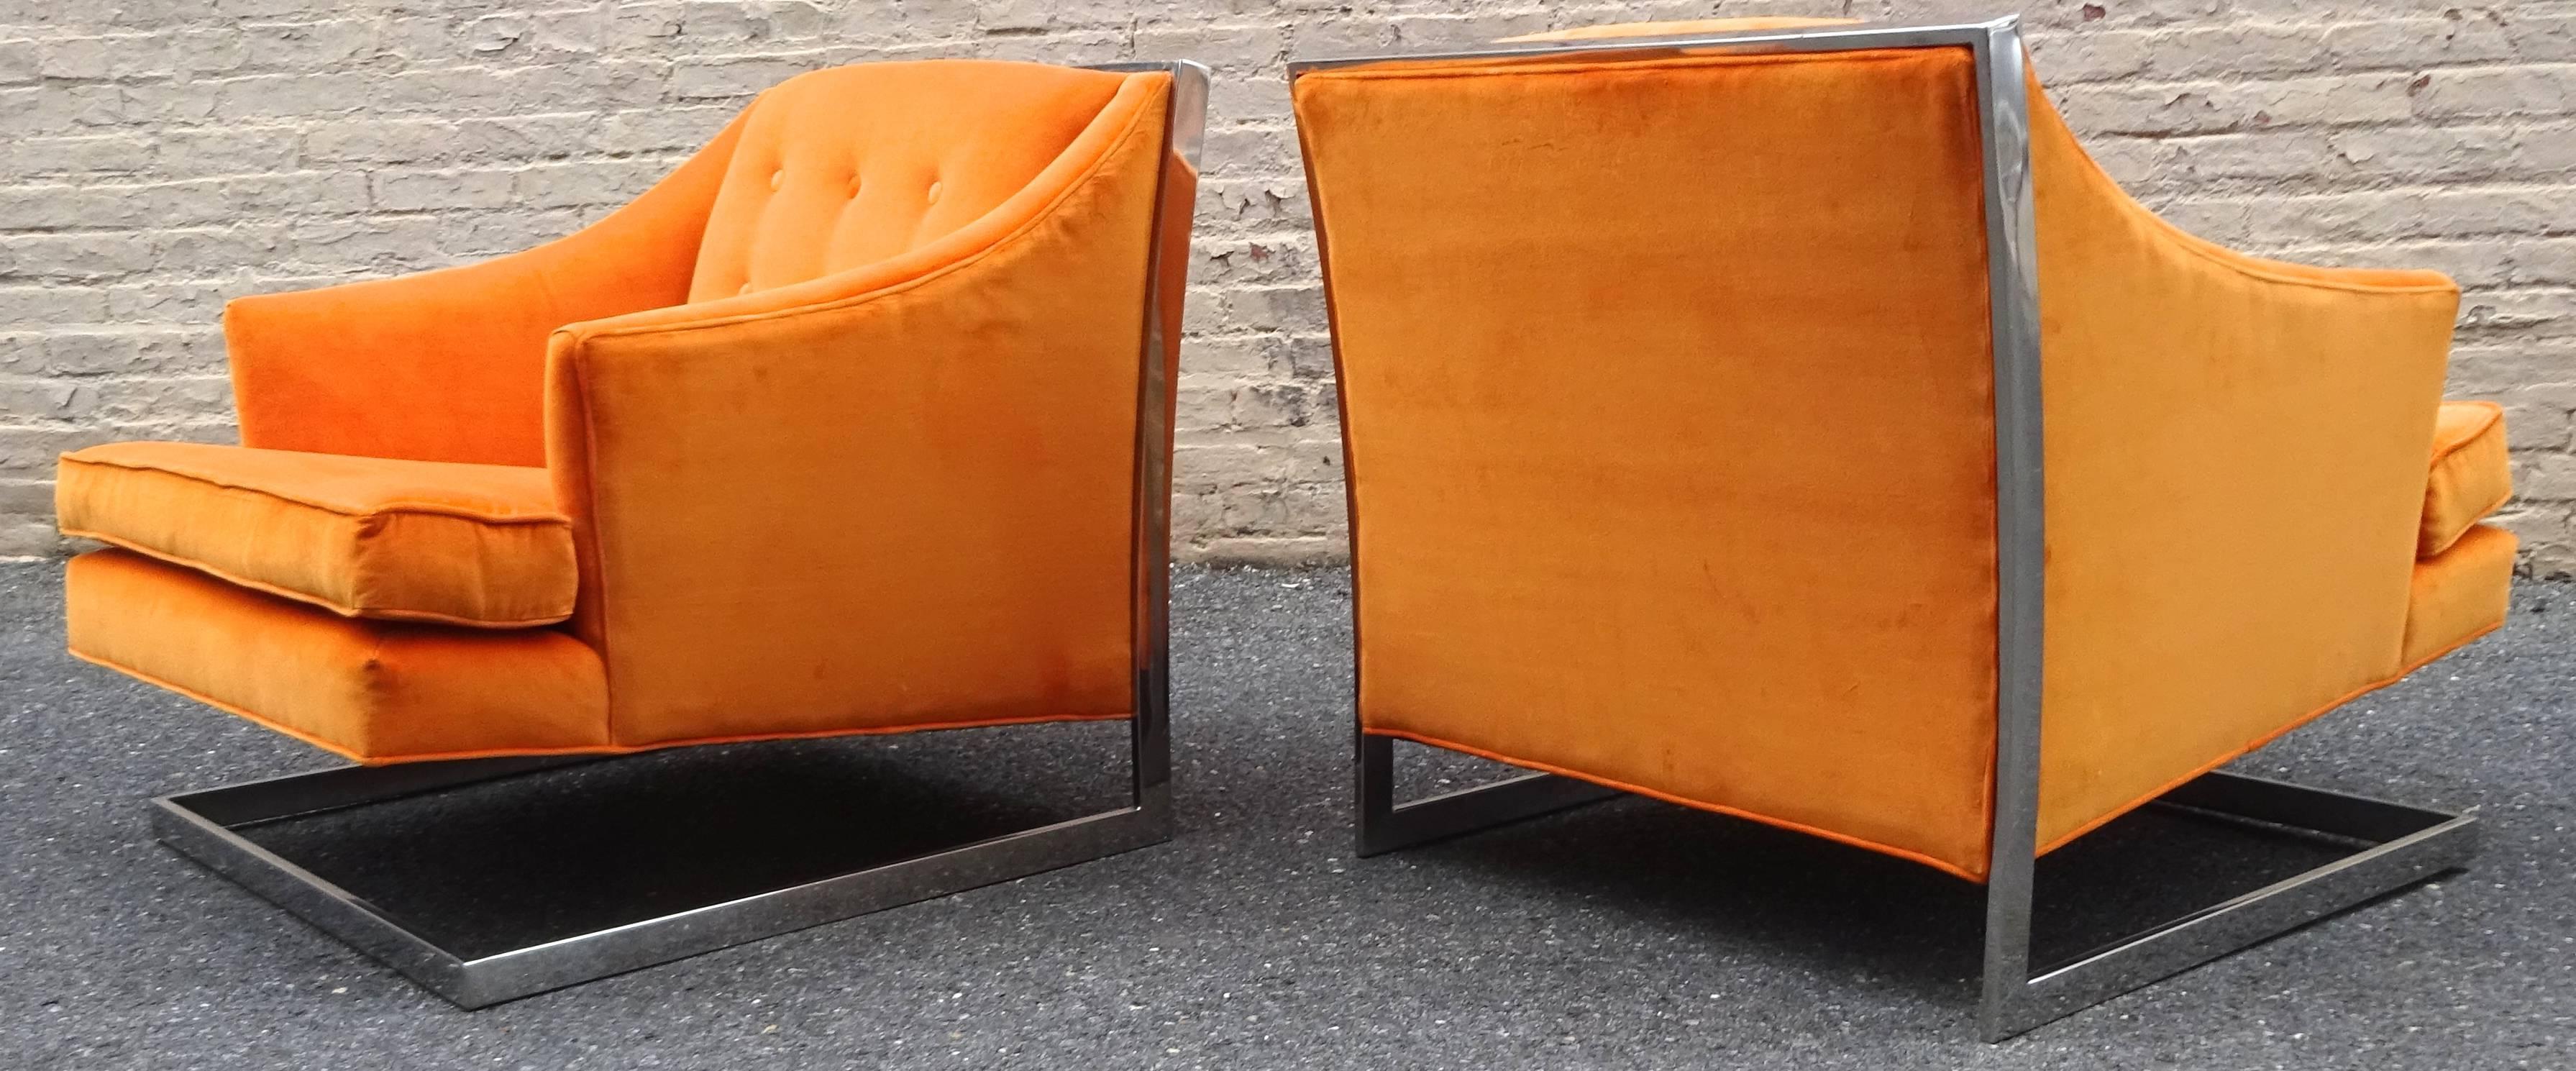 Fabulous Pair of 1970's Chrome Lounge Chairs After Milo Baughman In Excellent Condition For Sale In Washington, DC